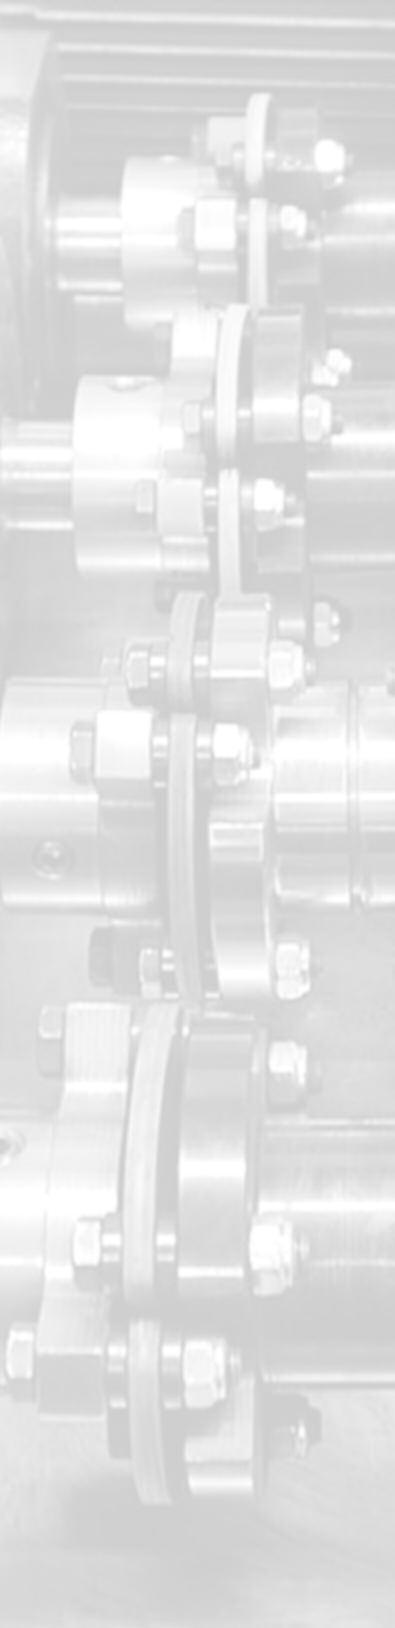 Modified Discs For Increased Performance Stainless Steel Couplings For use in